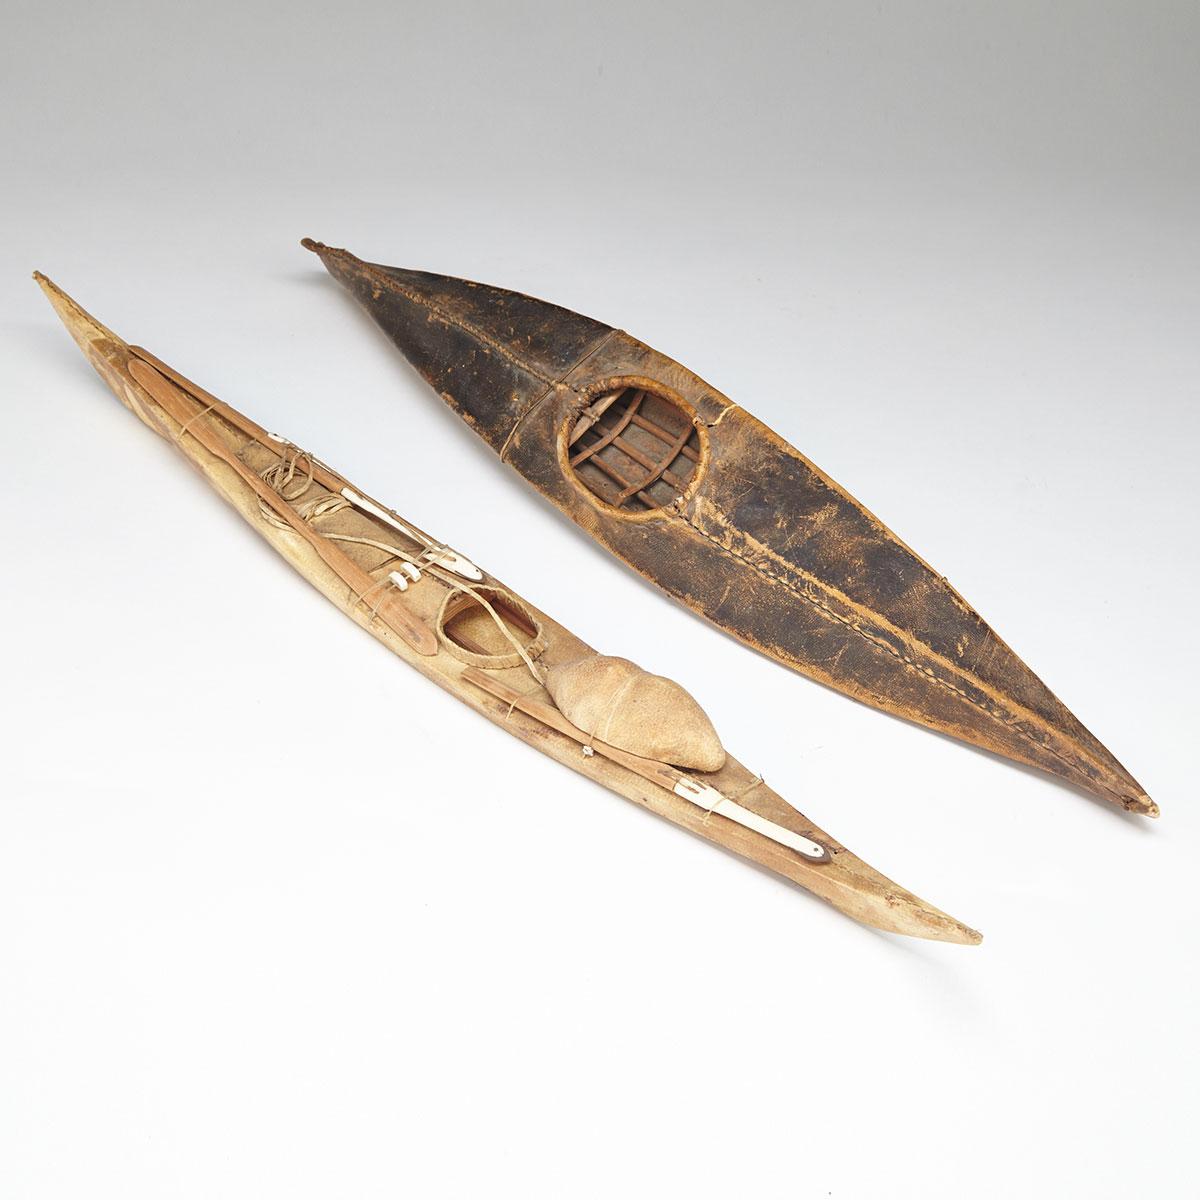 Two Inuit Models of Kayaks, 19th and 20th centuries